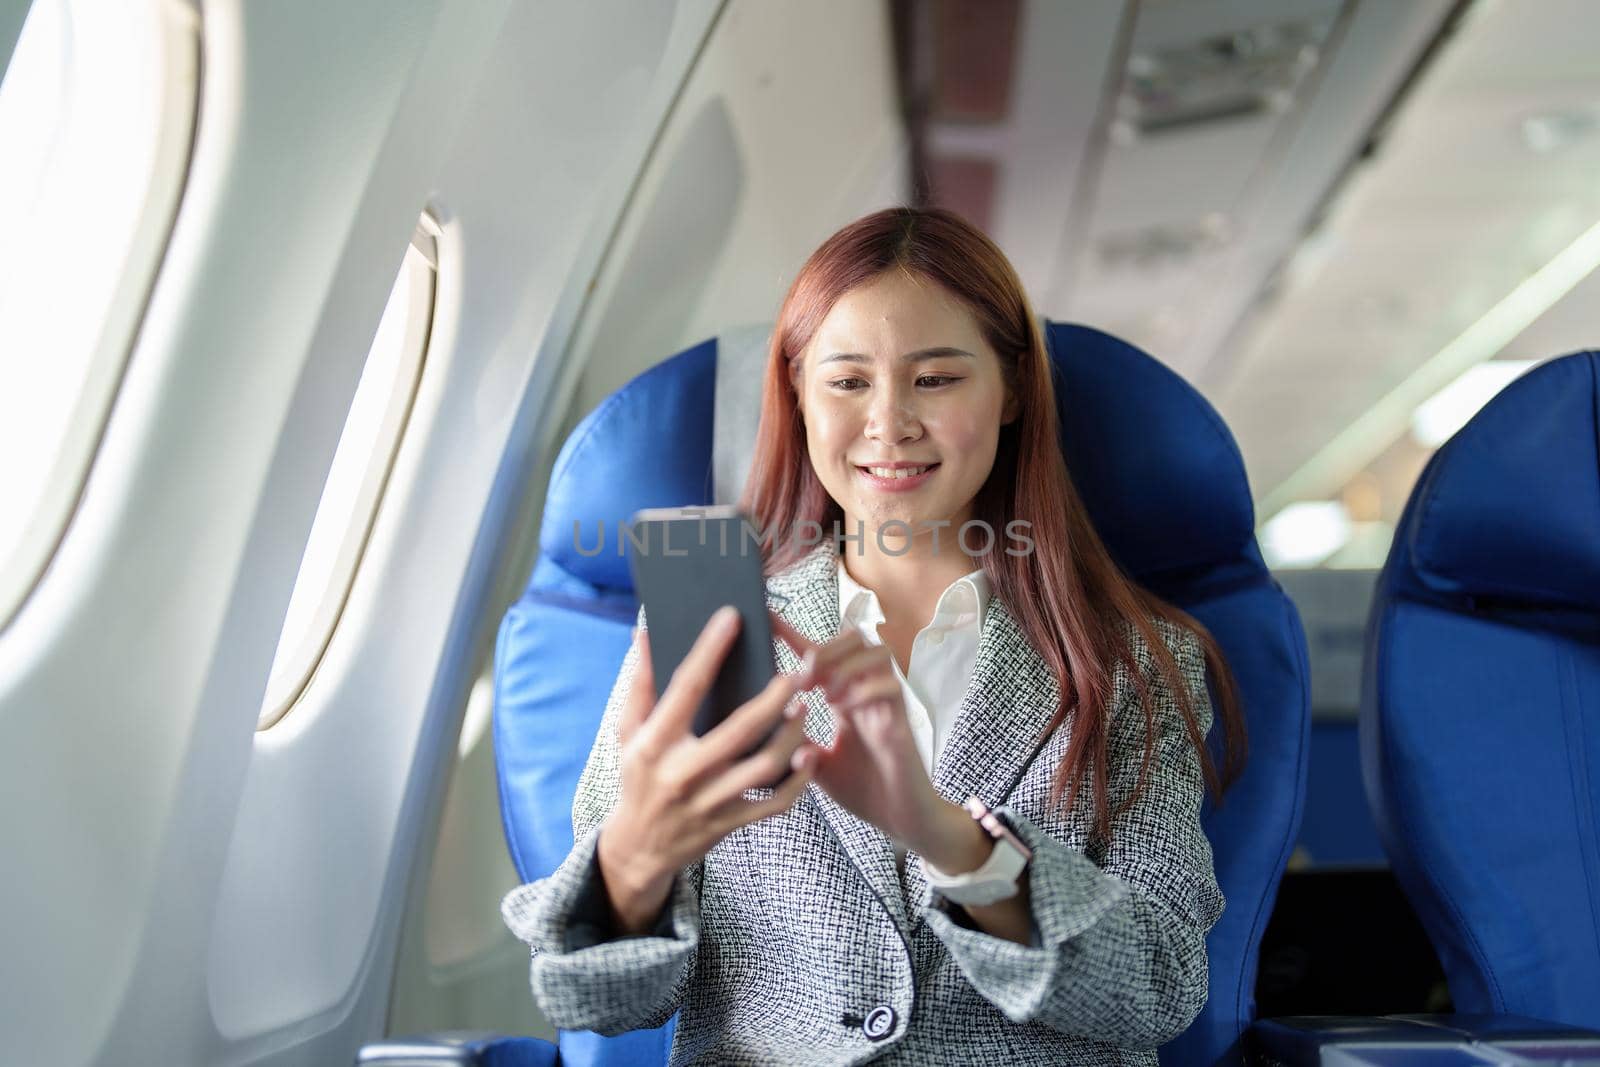 A portrait of a smiling Asian businesswoman using her phone while on a plane.